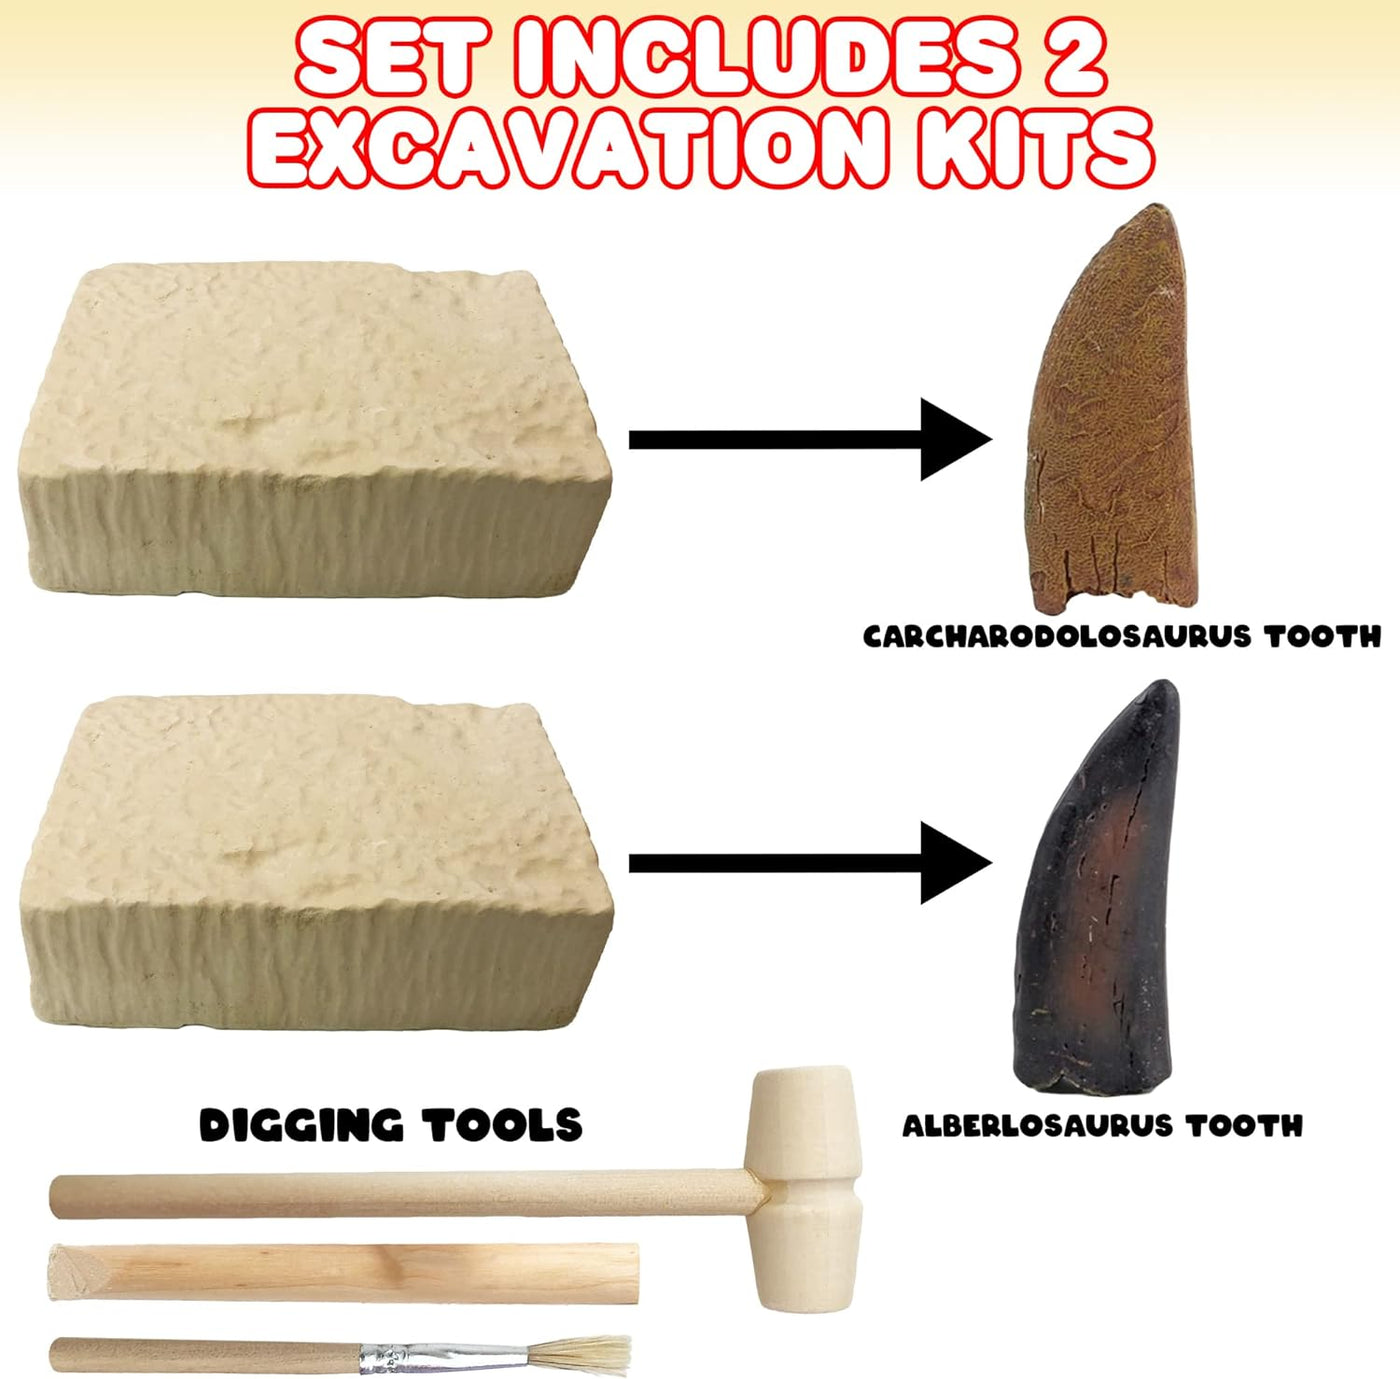 ArtCreativity Dino Teeth Dig and Discover Excavation Kit for Kids, Includes Alberlosaurus and Carcharodolosaurus Toy Fossil Teeth with 2 Digging Tools, Interactive Dinosaur Gifts for Boys and Girls